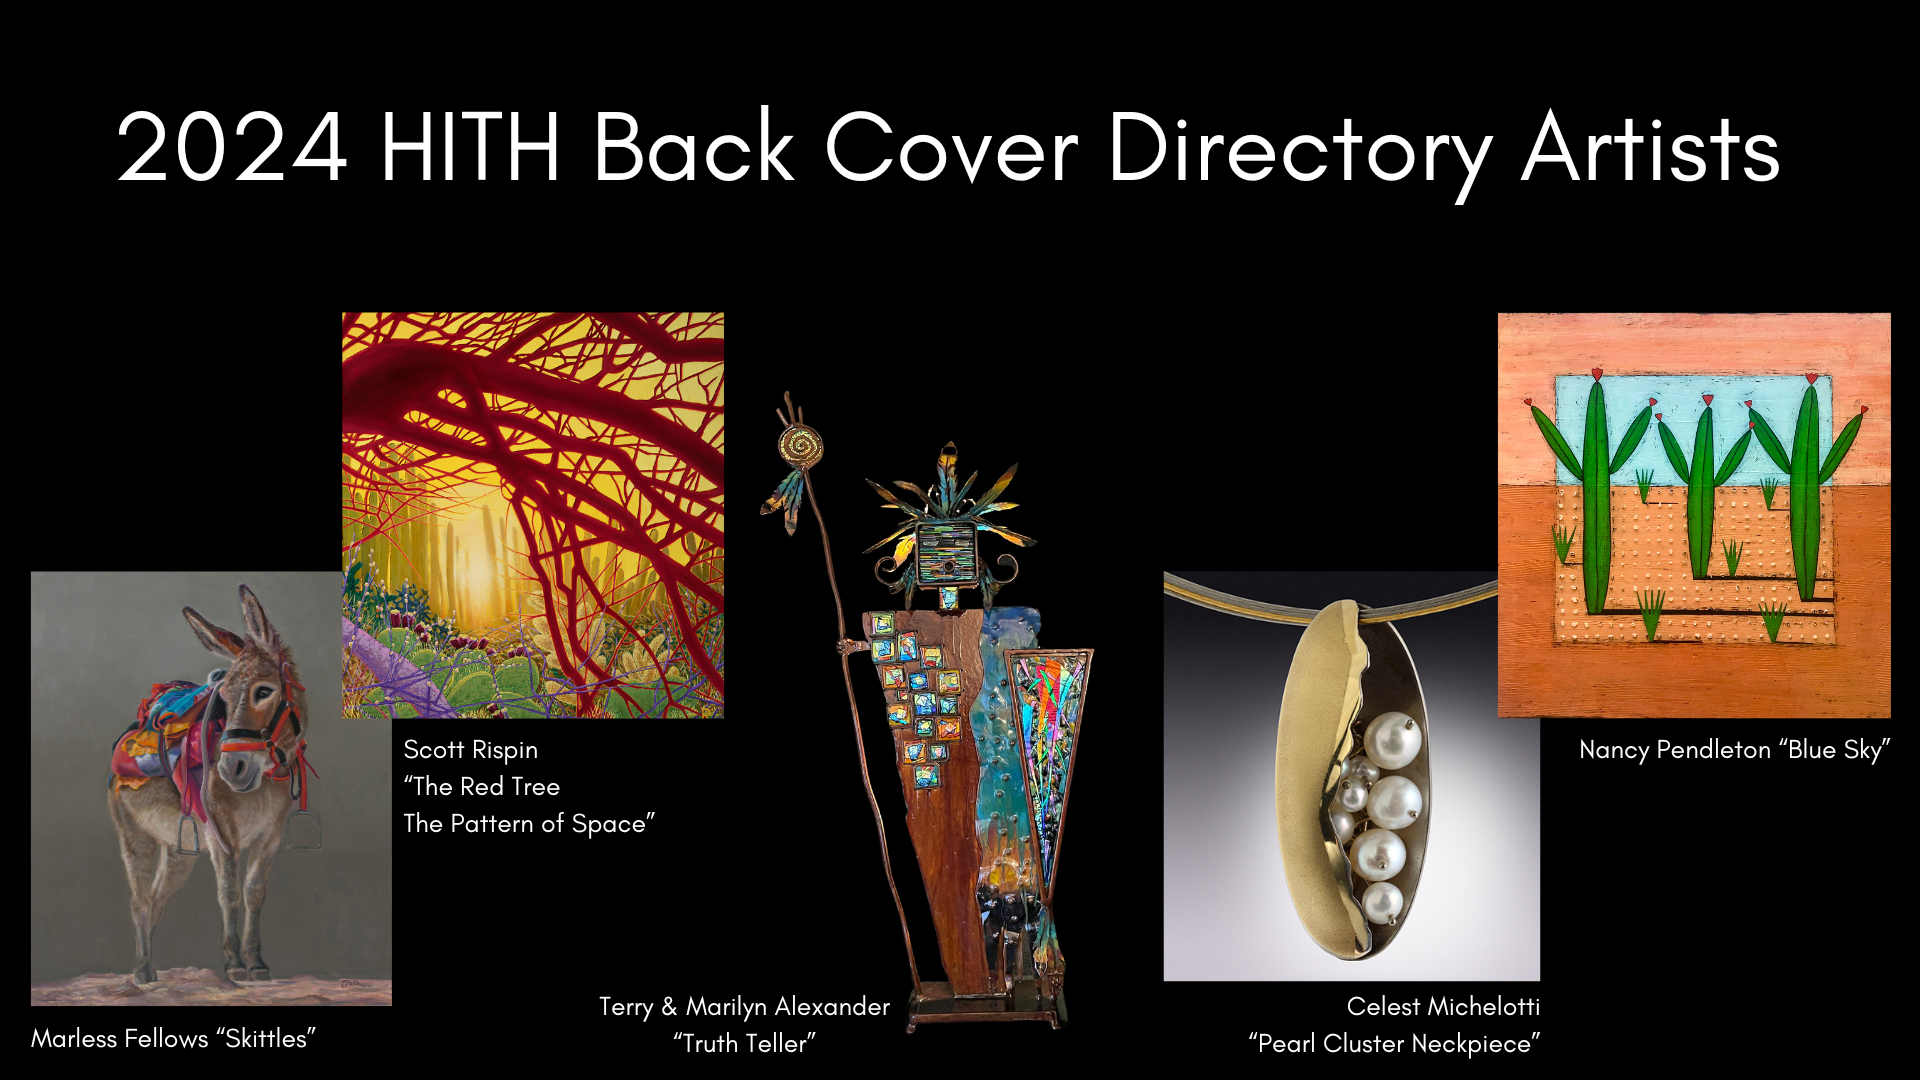 2024 HITH Back cover artists